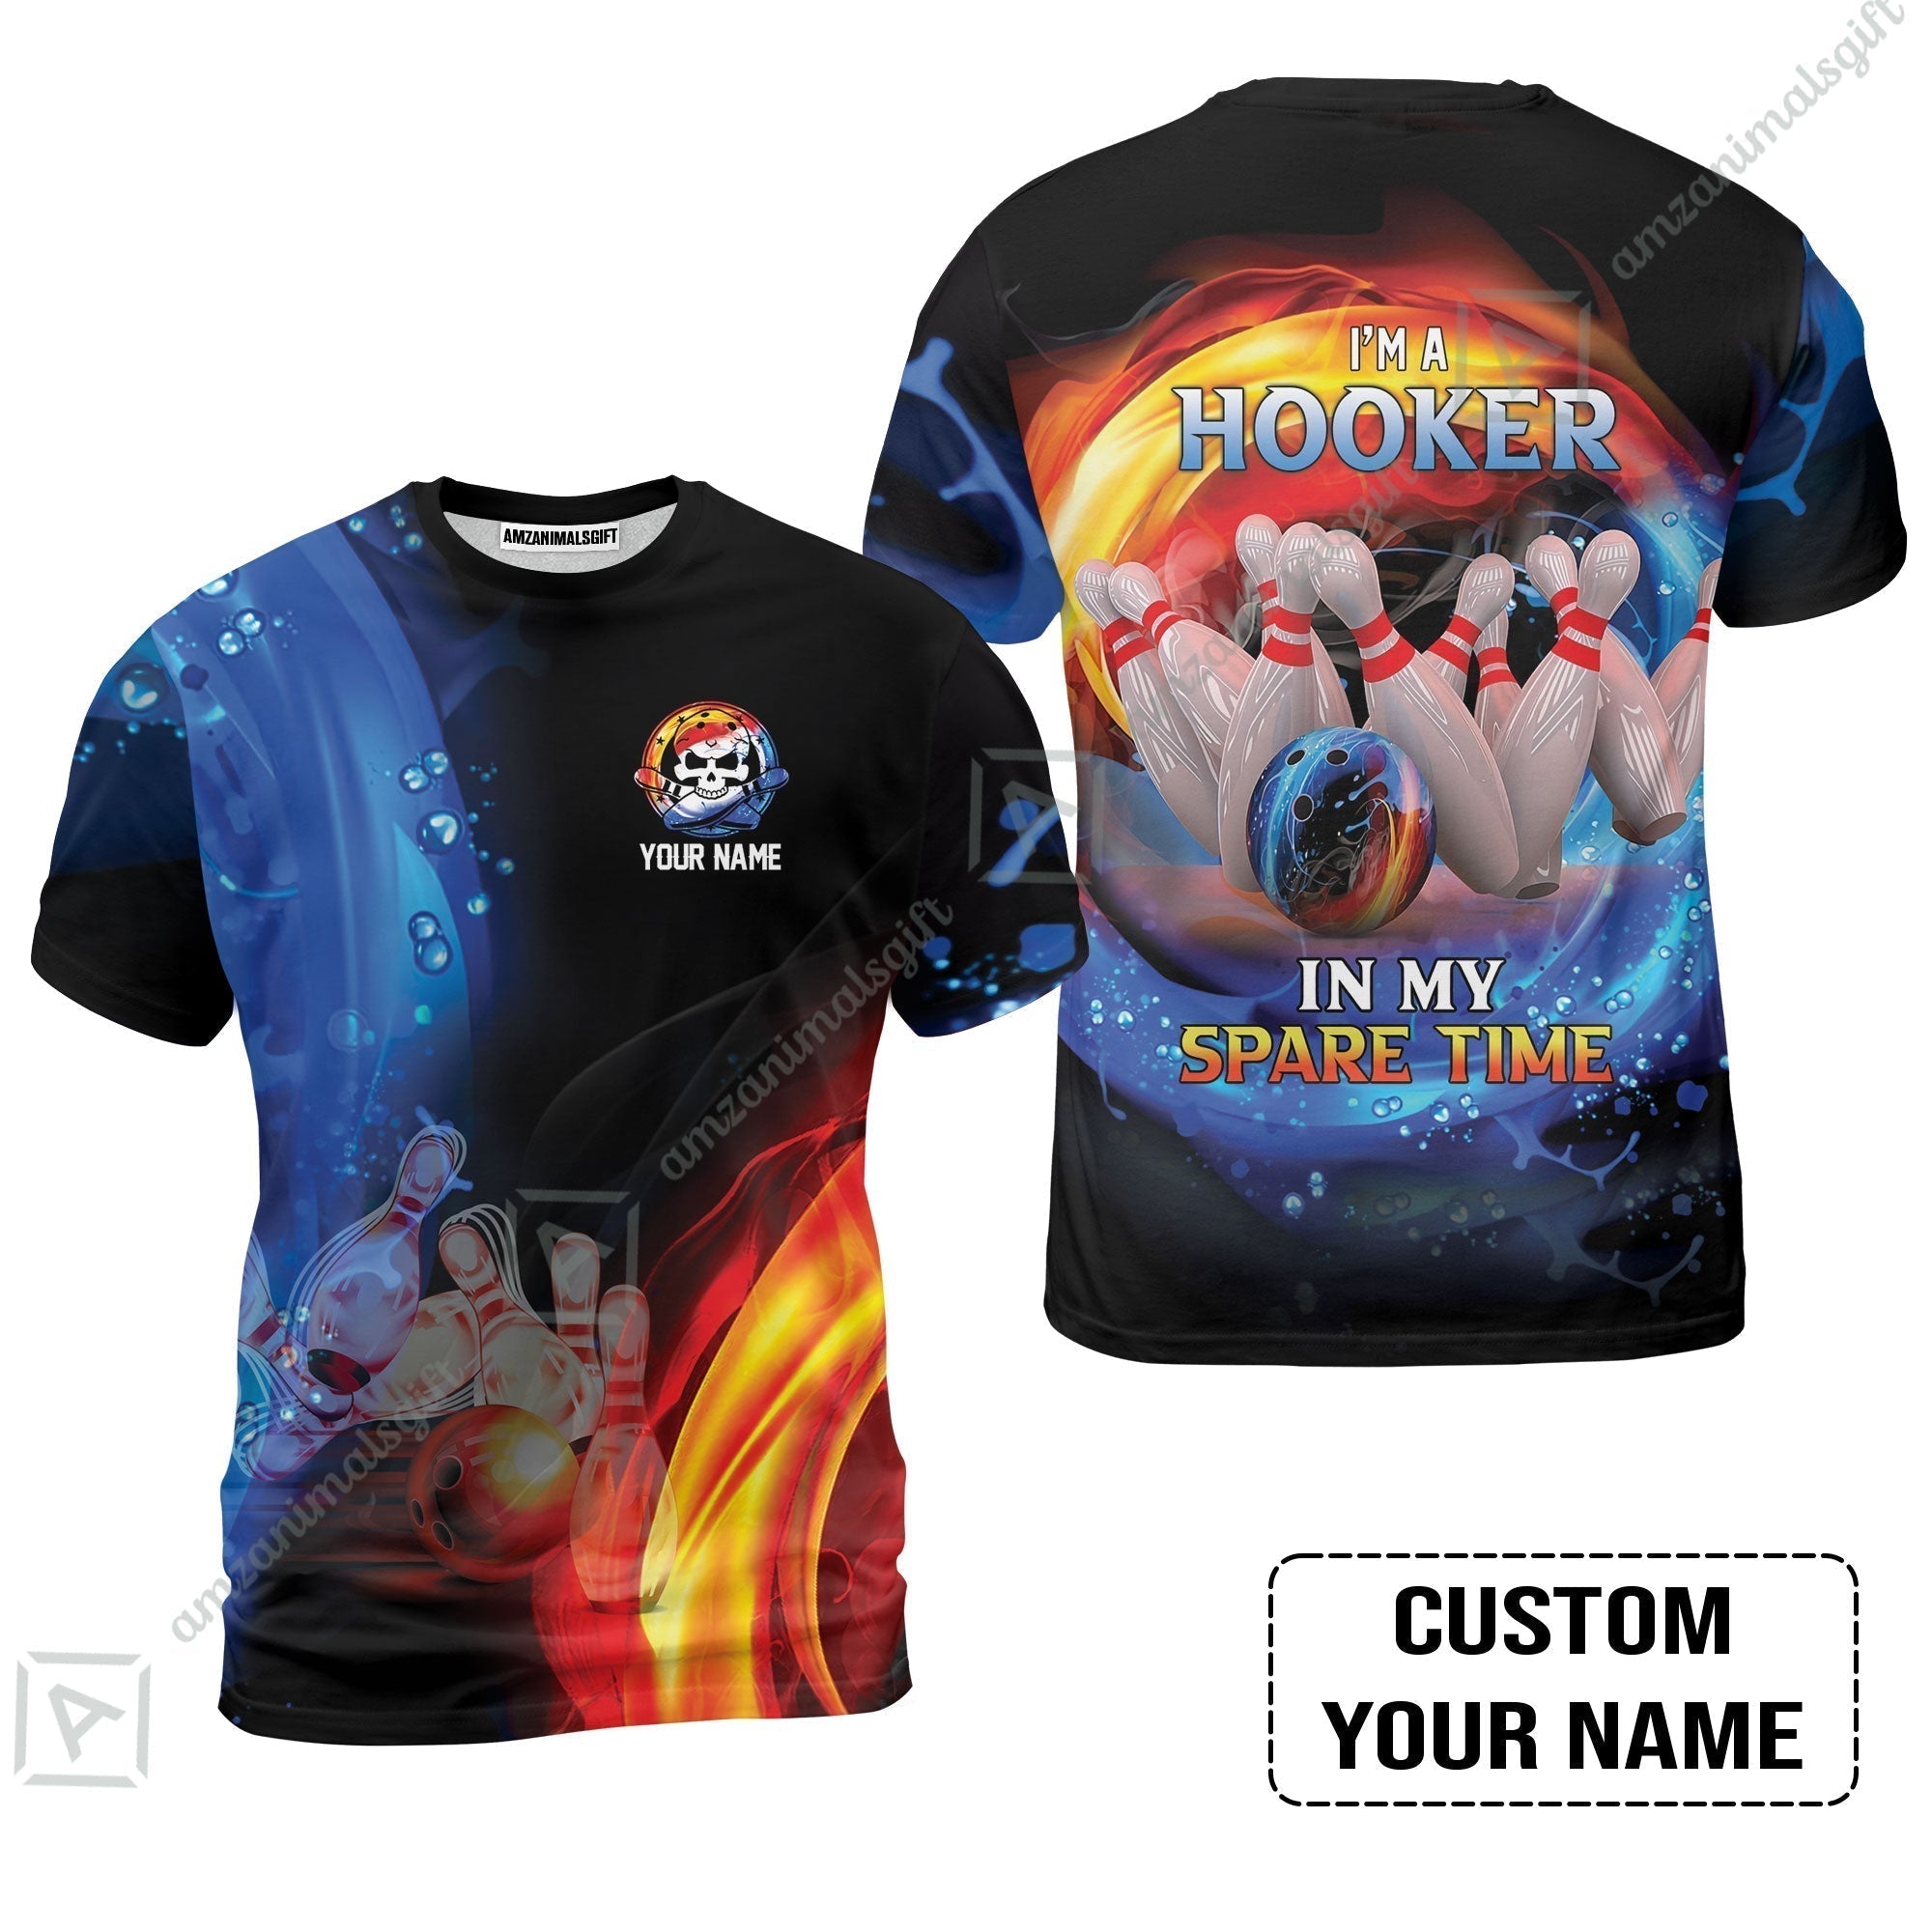 Customized Name Bowling T-Shirt - Bowling I'm A Hooker In My Spare Time Personalized T-Shirt